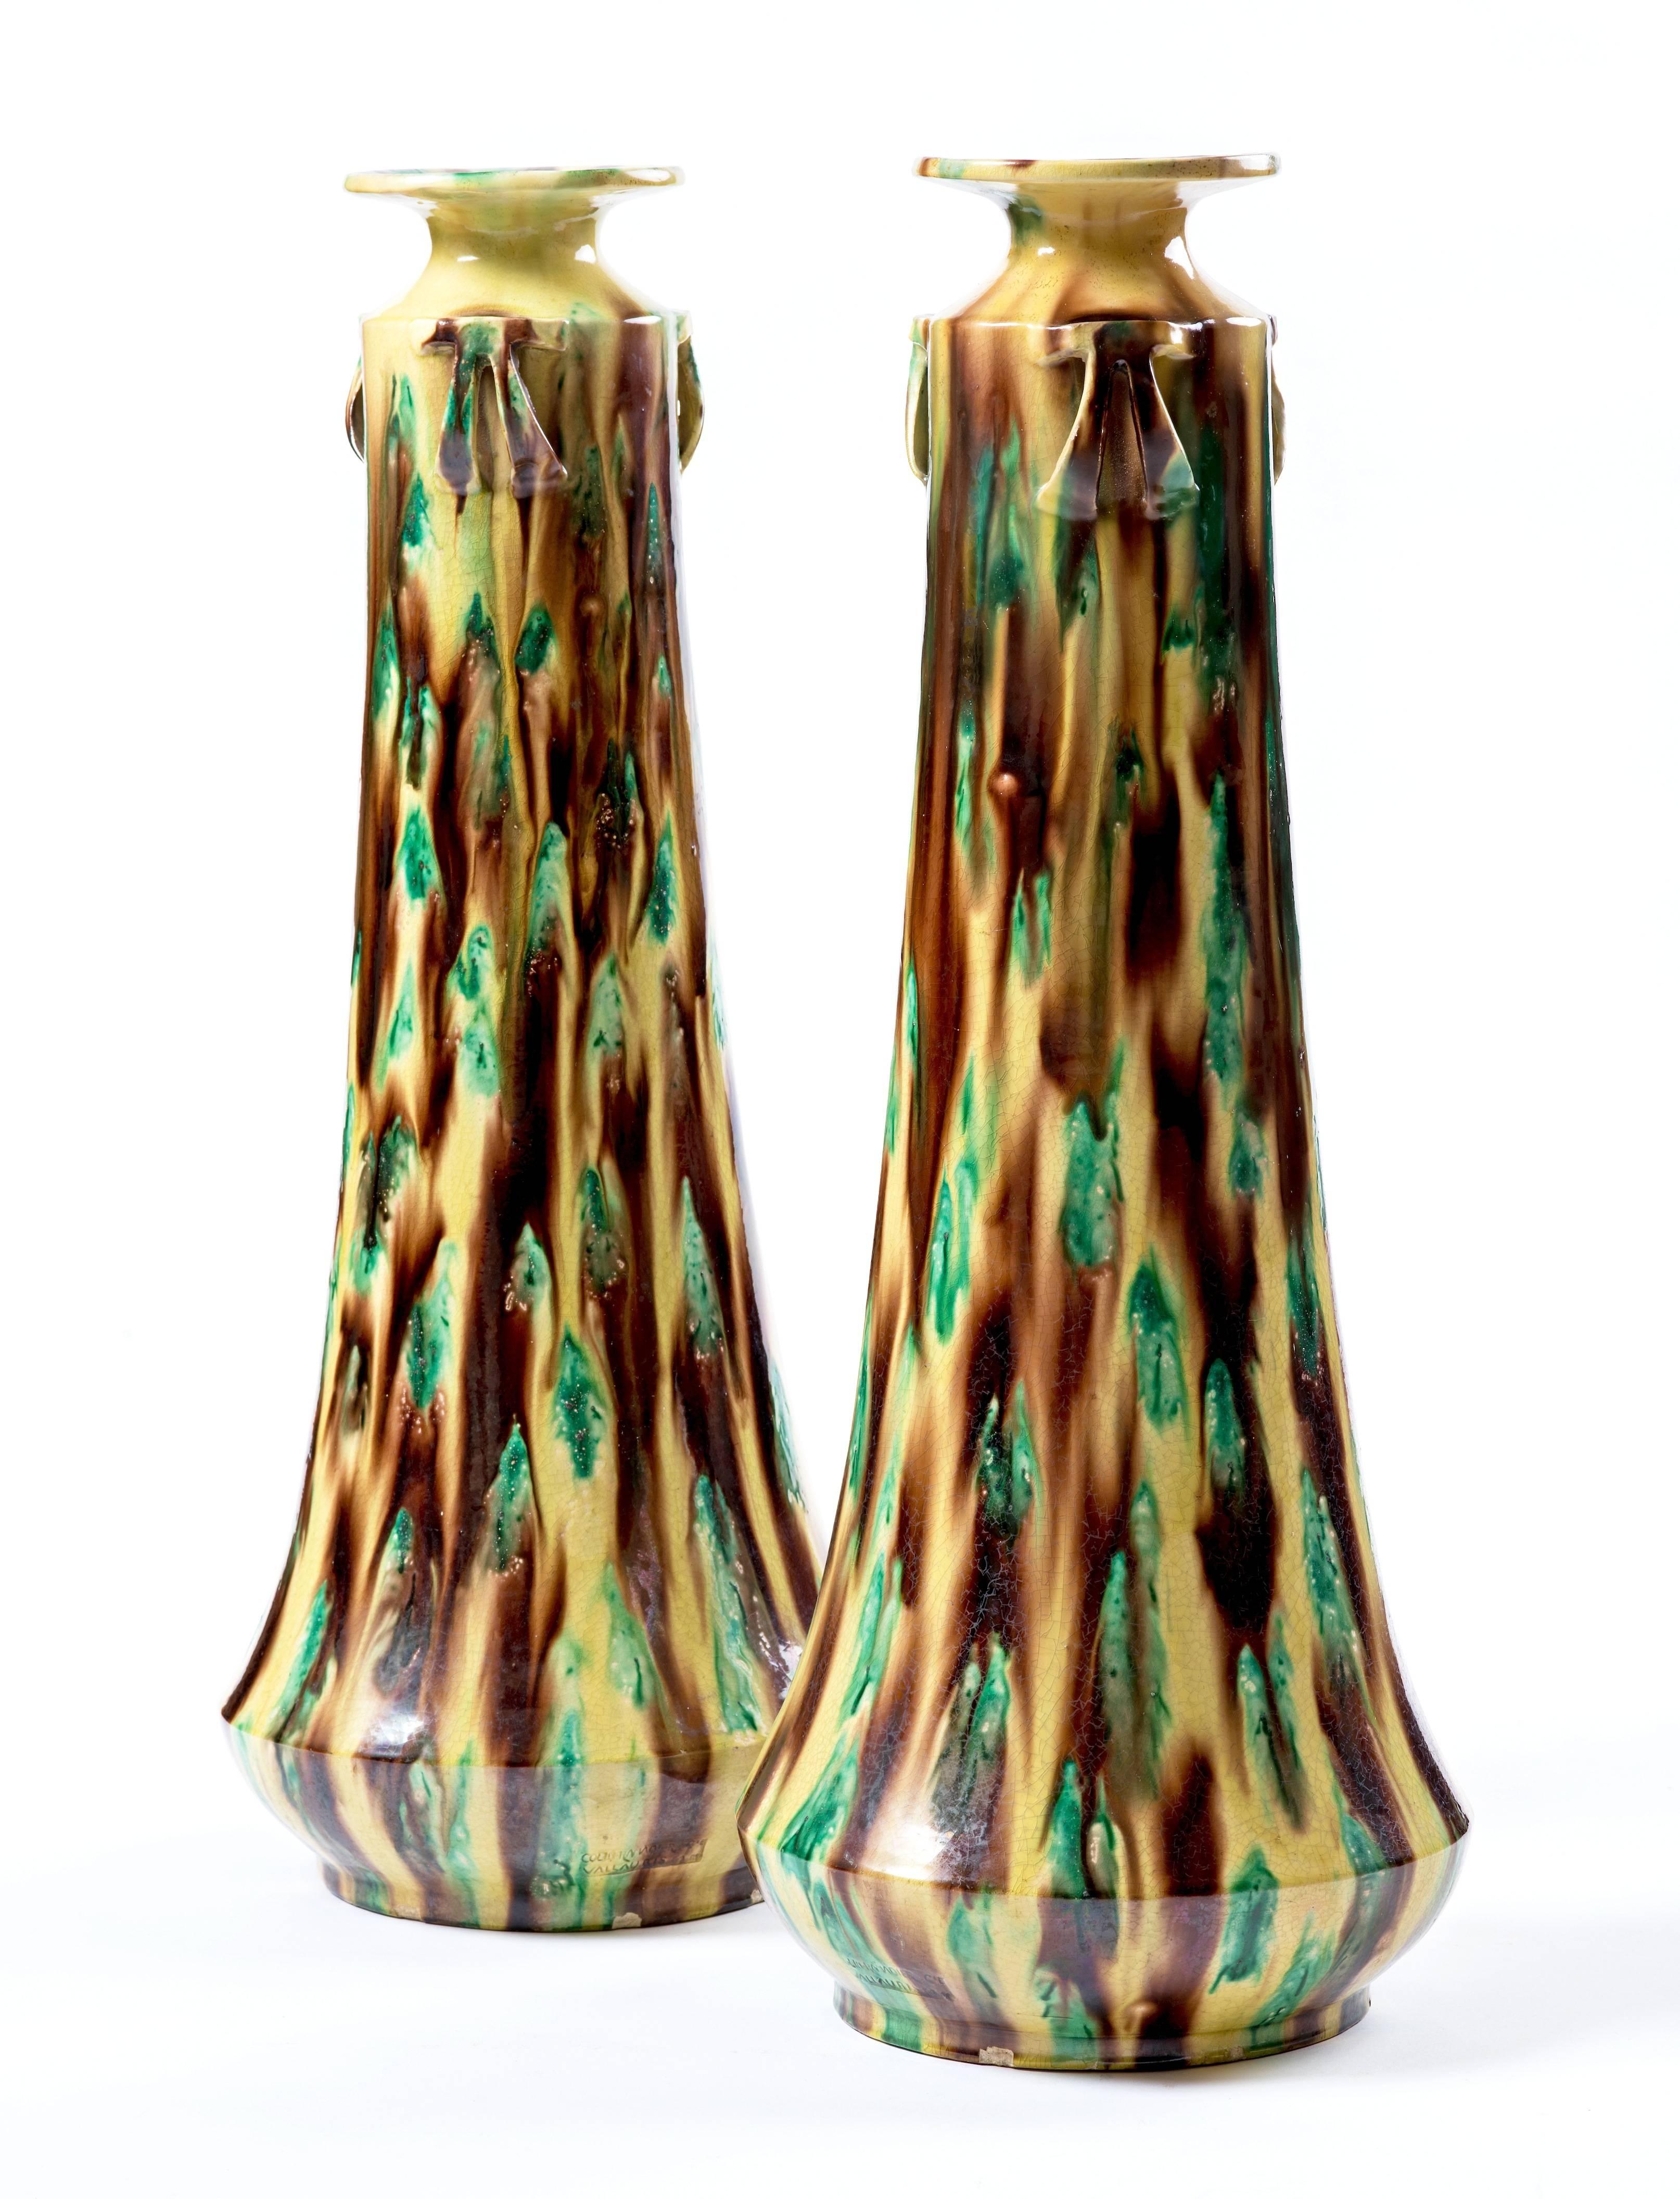 French Vallauris Yellow, Green and Brown Vases by Colin-Ramadier